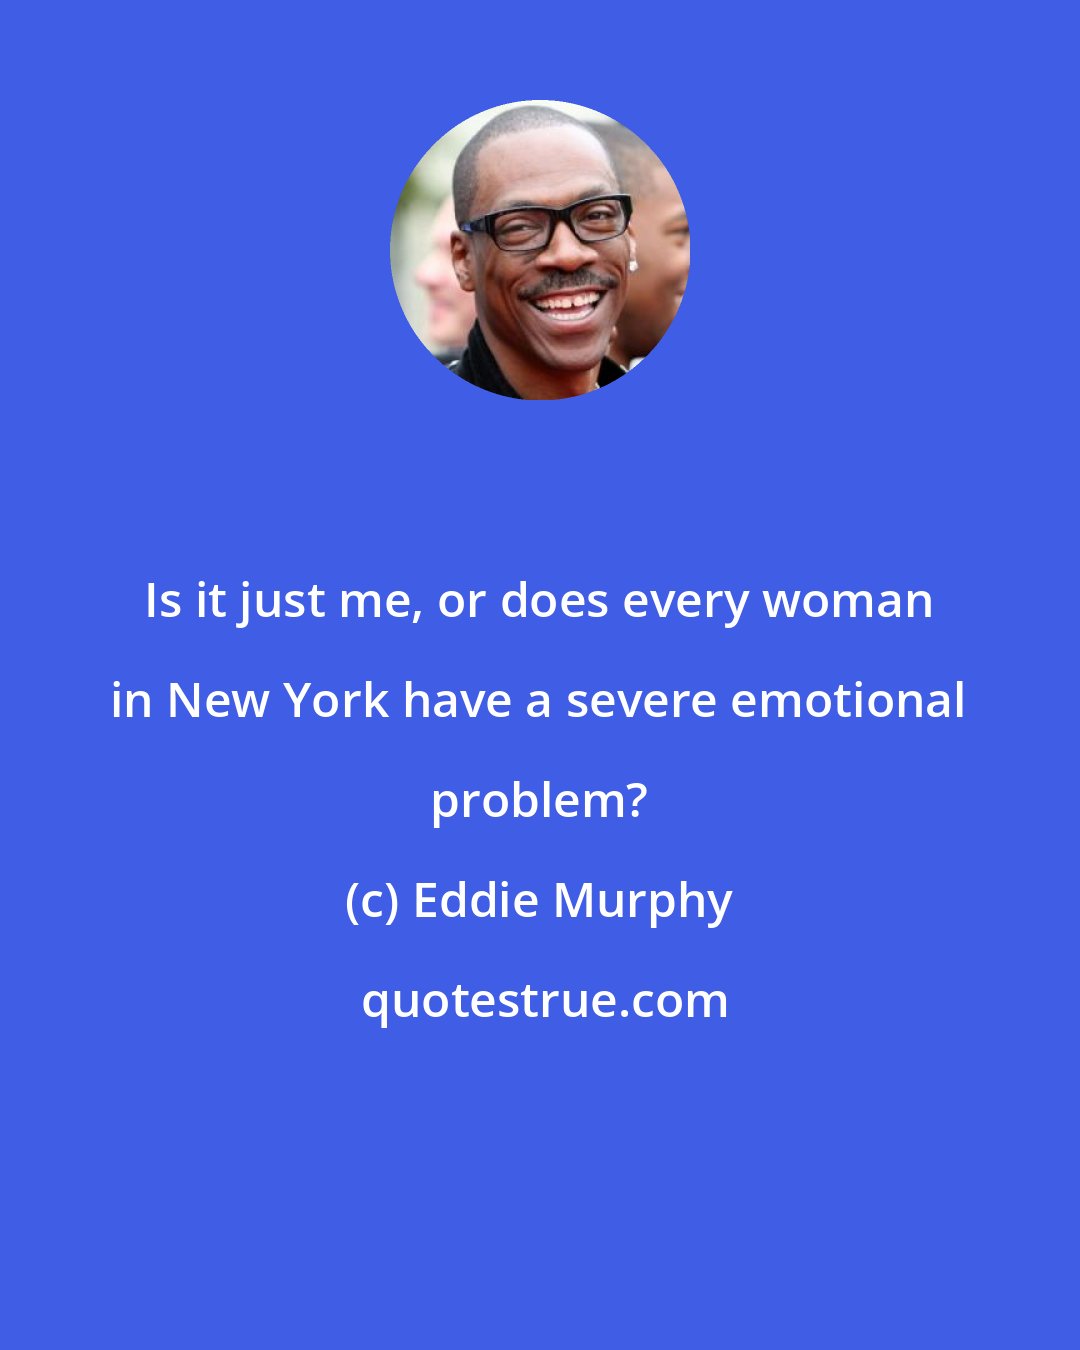 Eddie Murphy: Is it just me, or does every woman in New York have a severe emotional problem?